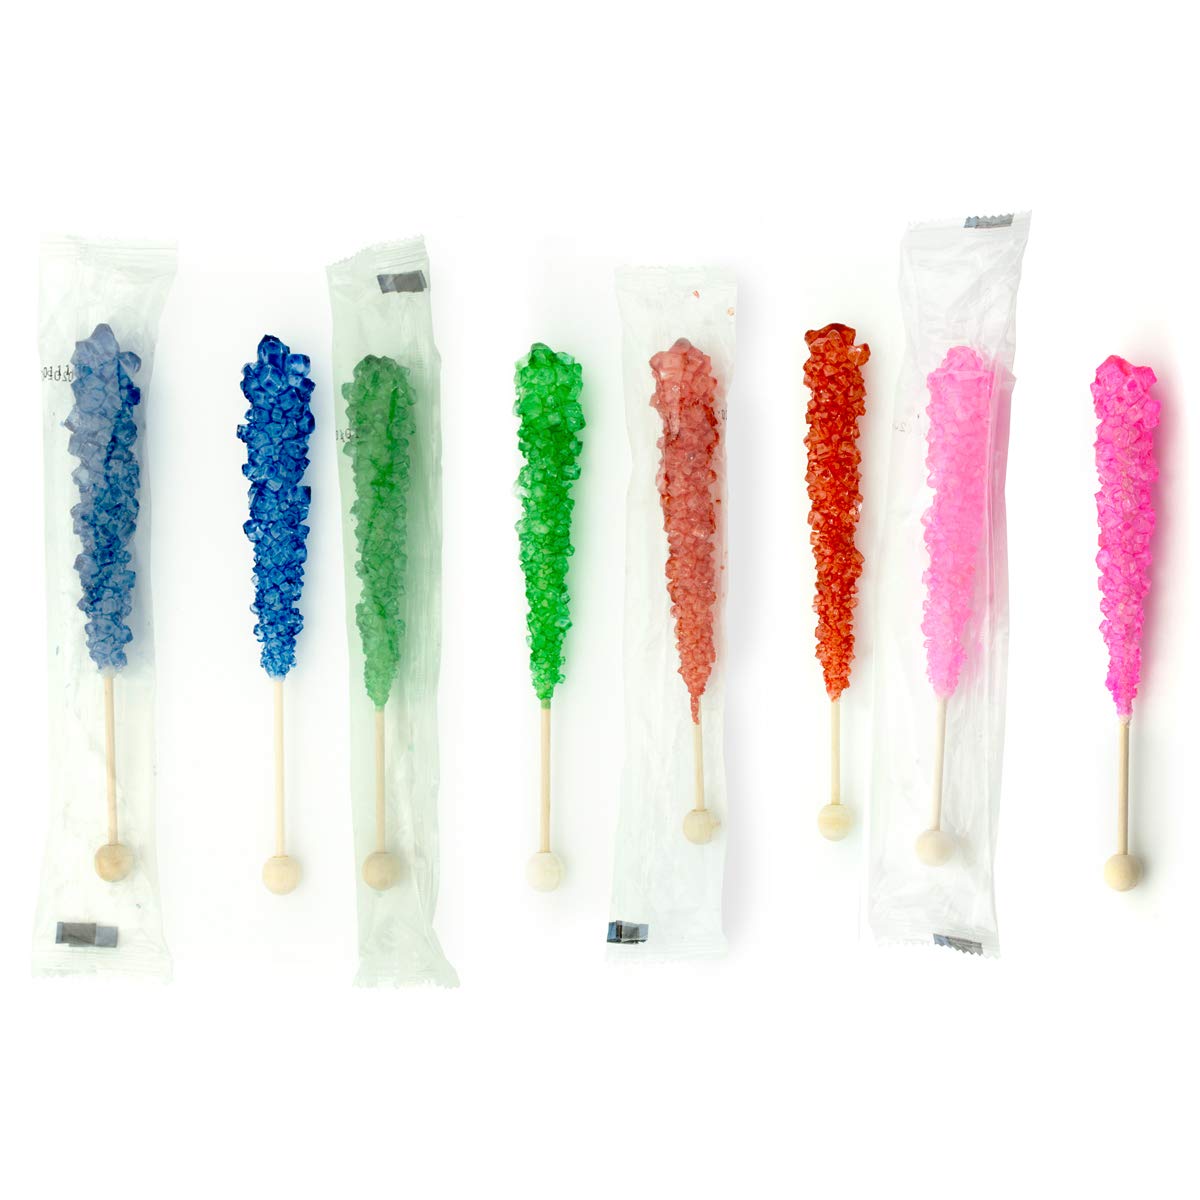  Boones Mill | XL Rock Crystal Candy Sticks | Assorted Flavors | 36 Count